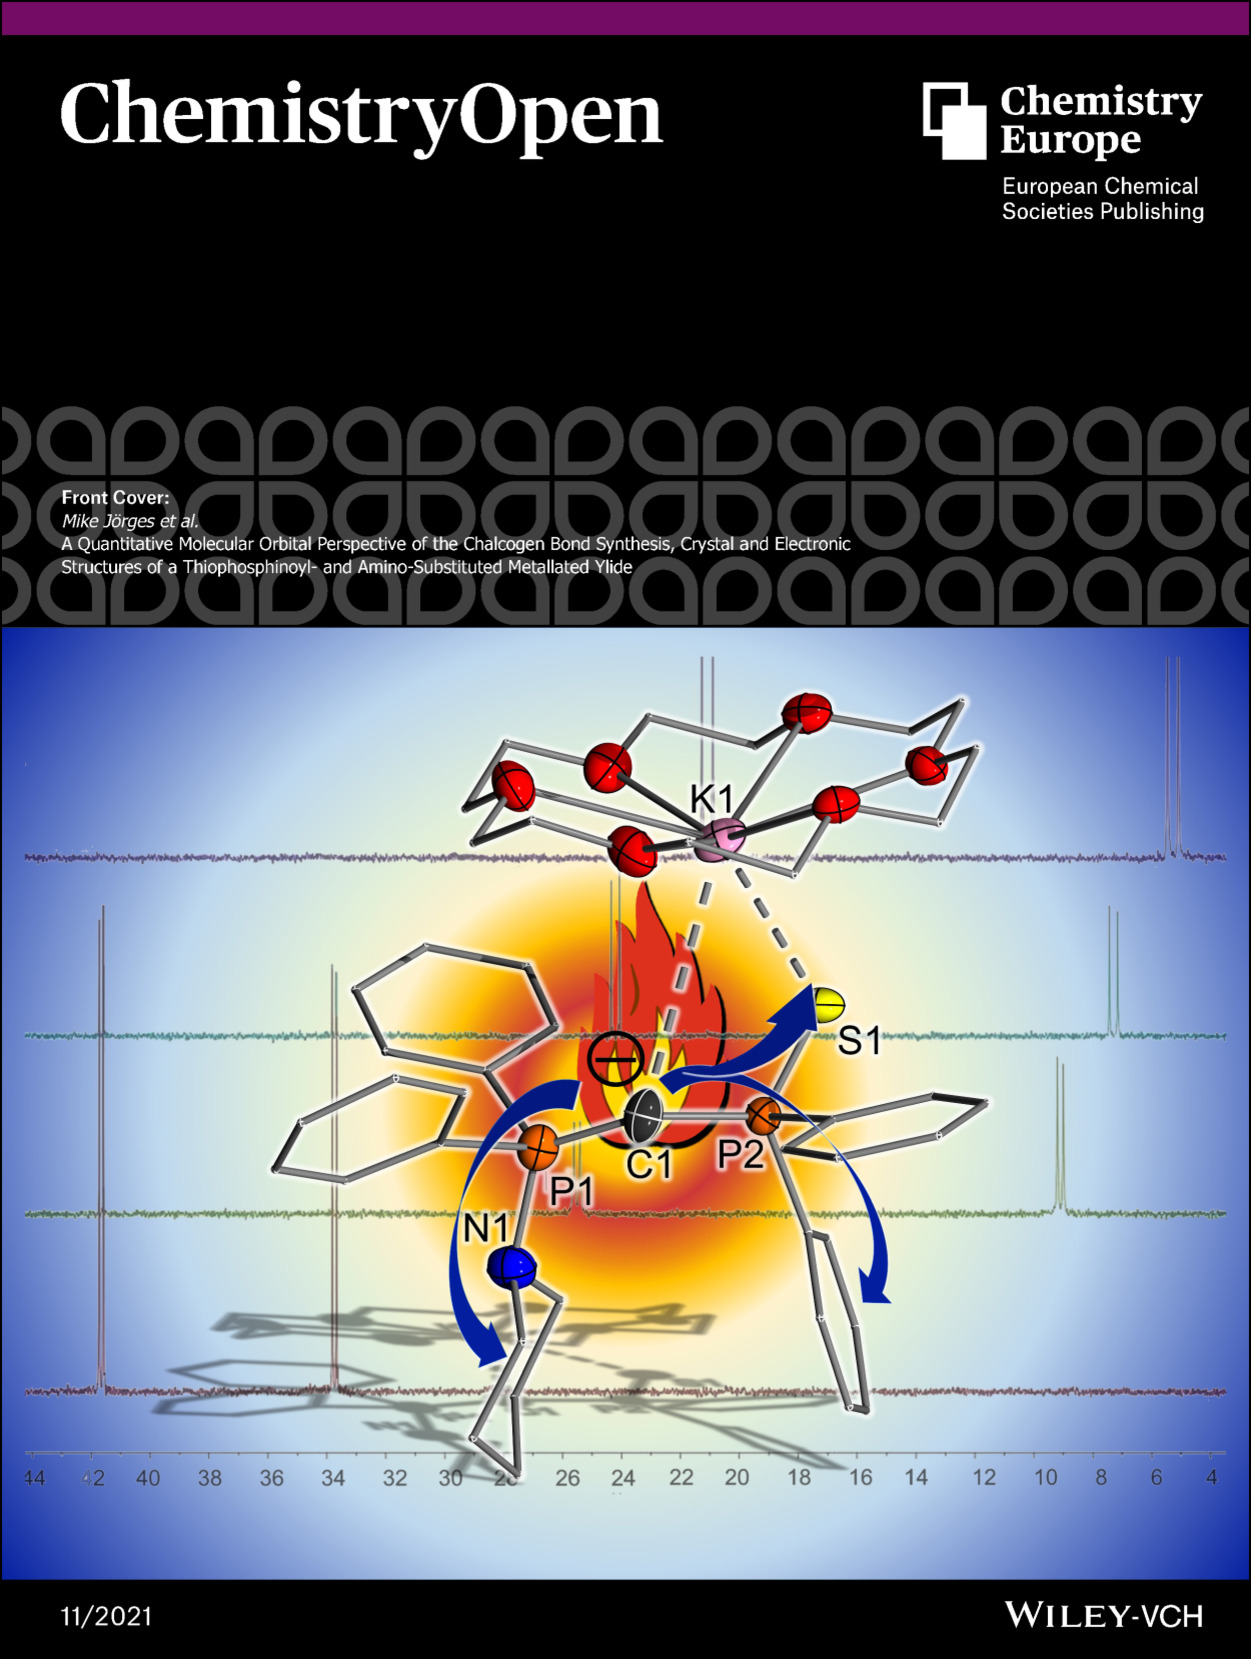 Front Cover: Synthesis, Crystal and Electronic Structures of a Thiophosphinoyl‐ and Amino‐Substituted Metallated Ylide (ChemistryOpen 11/2021)